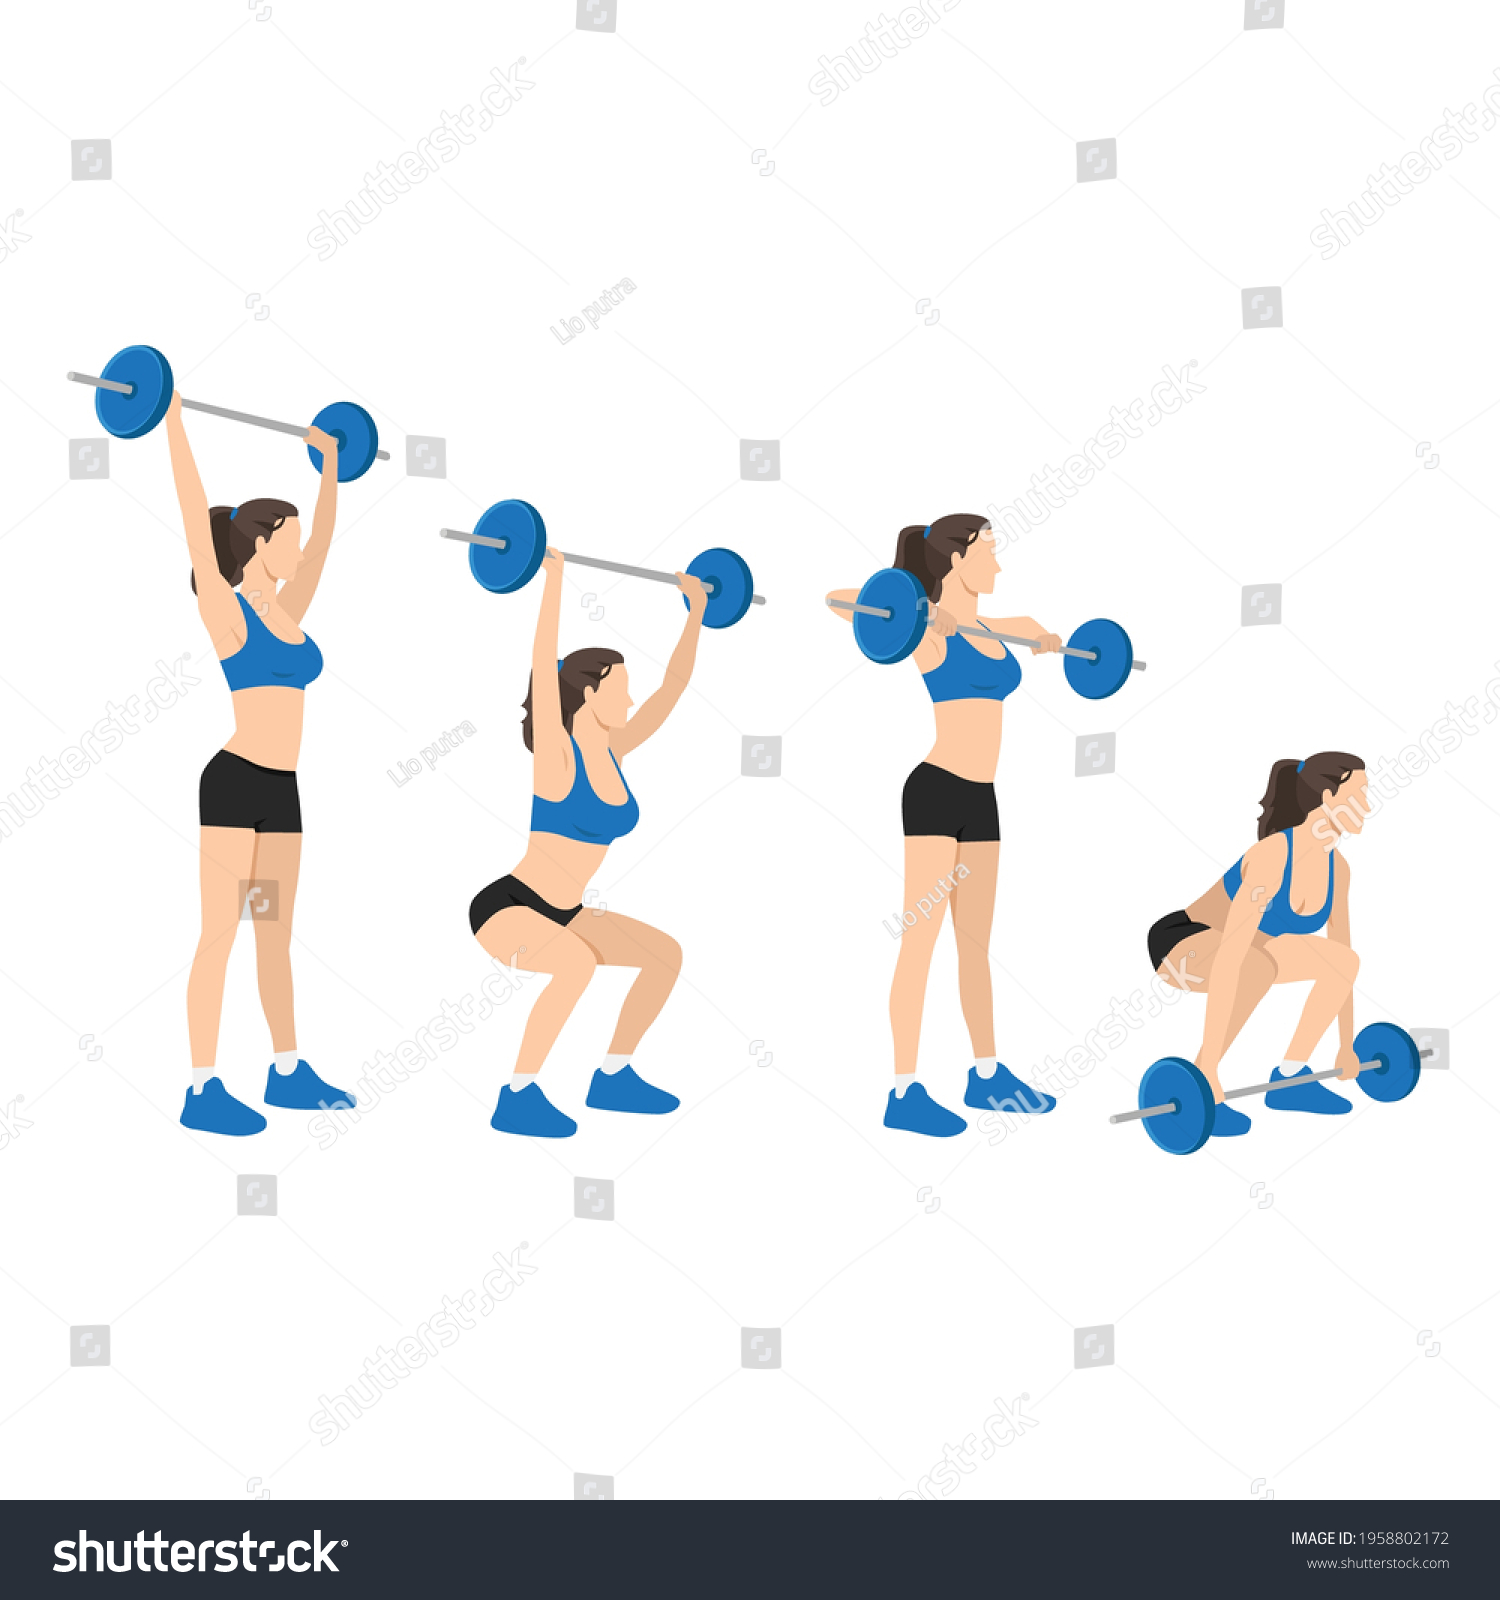 SVG of the vector illustration of the woman weightlifter with snatching barbell. Step by step flat vector illustration. Barbell power snatch svg